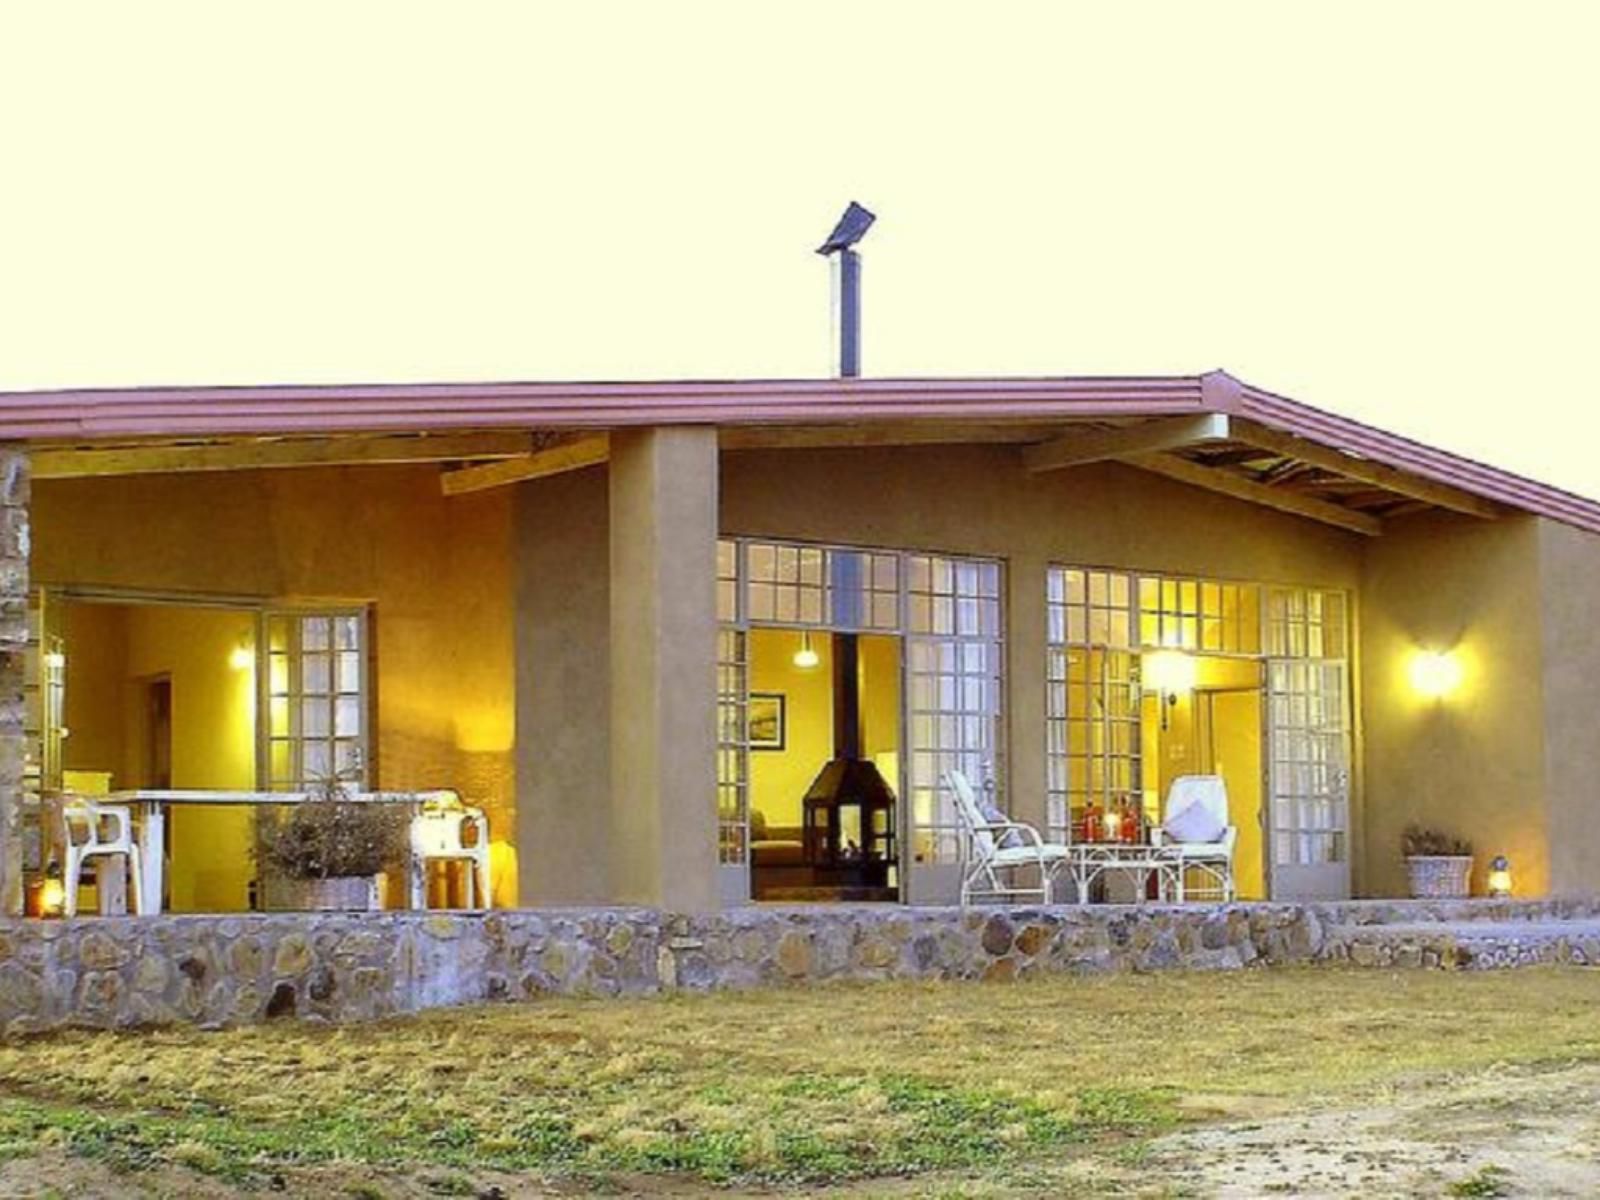 Amohela Ho Spitskop Country Retreat And Conservancy Ficksburg Free State South Africa House, Building, Architecture